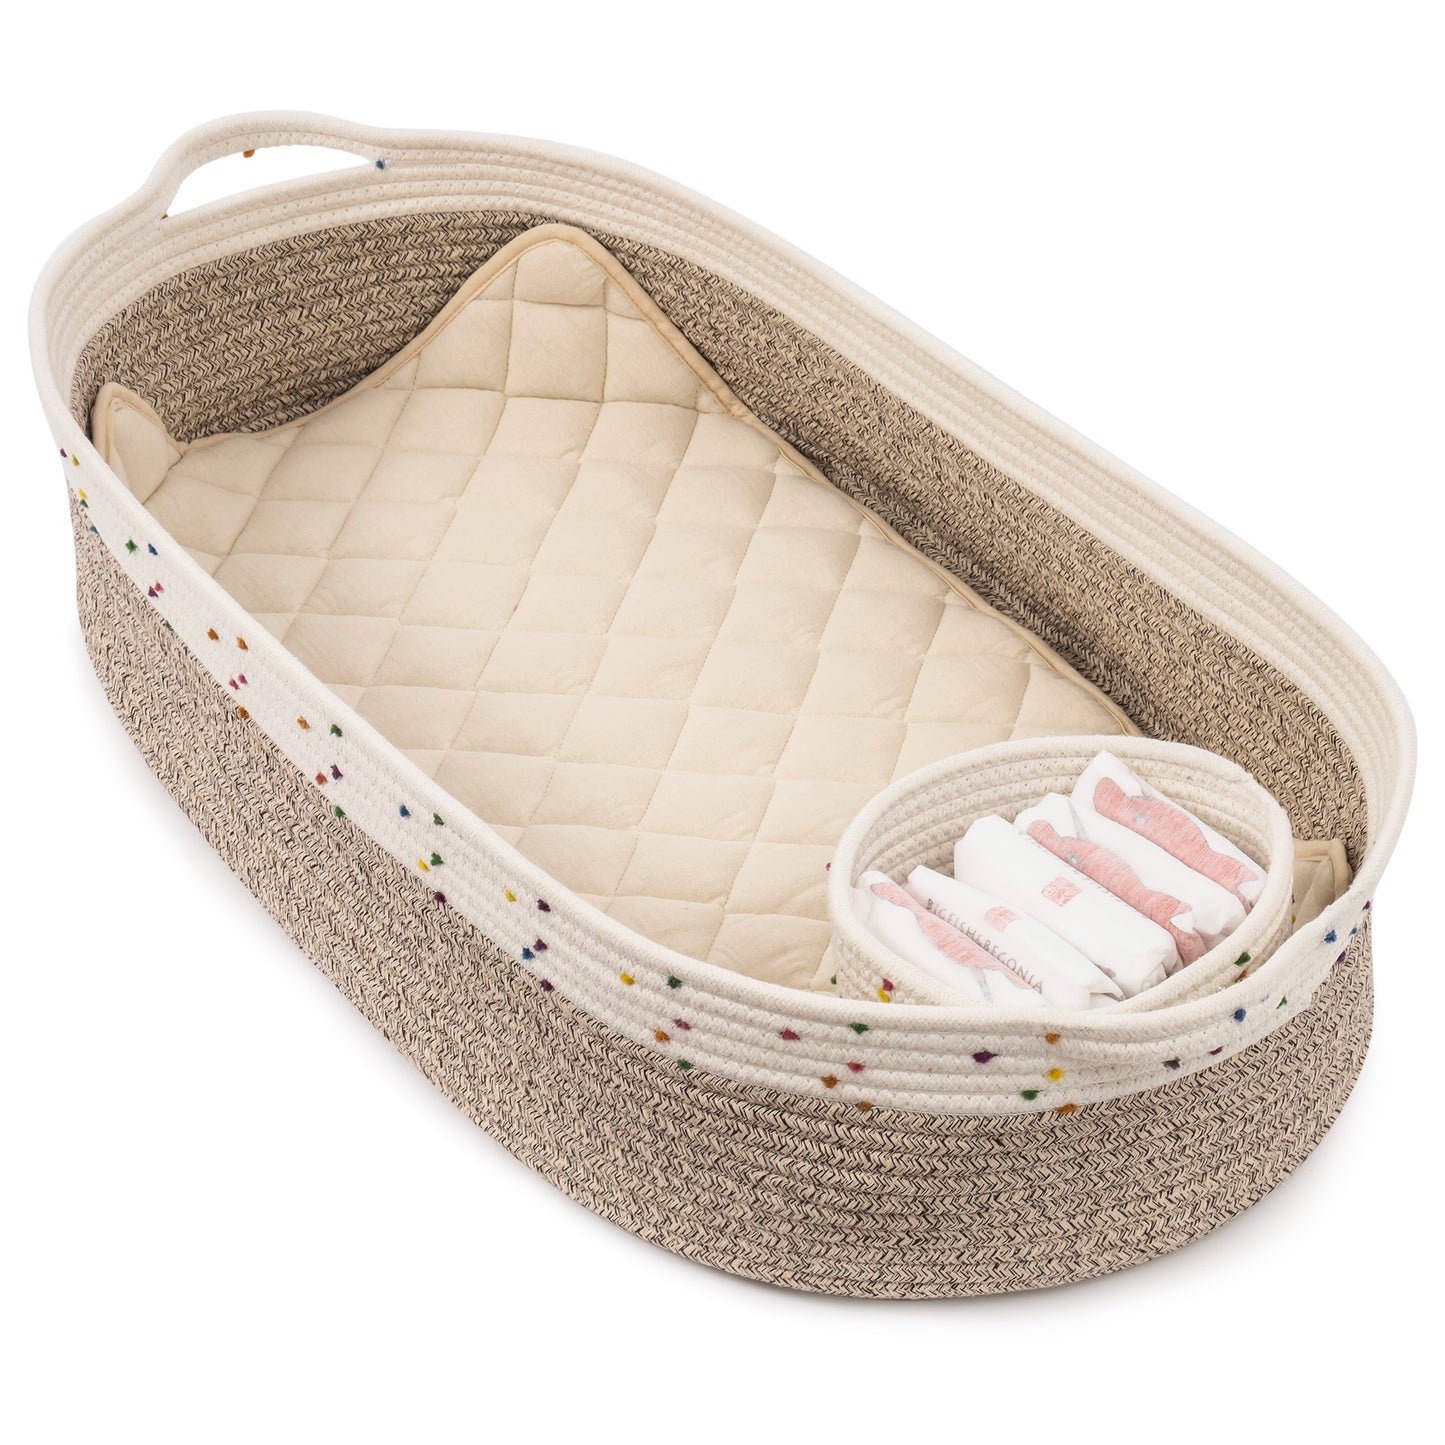 Baby Changing Basket  100% Cotton Rope - Ukerr Home